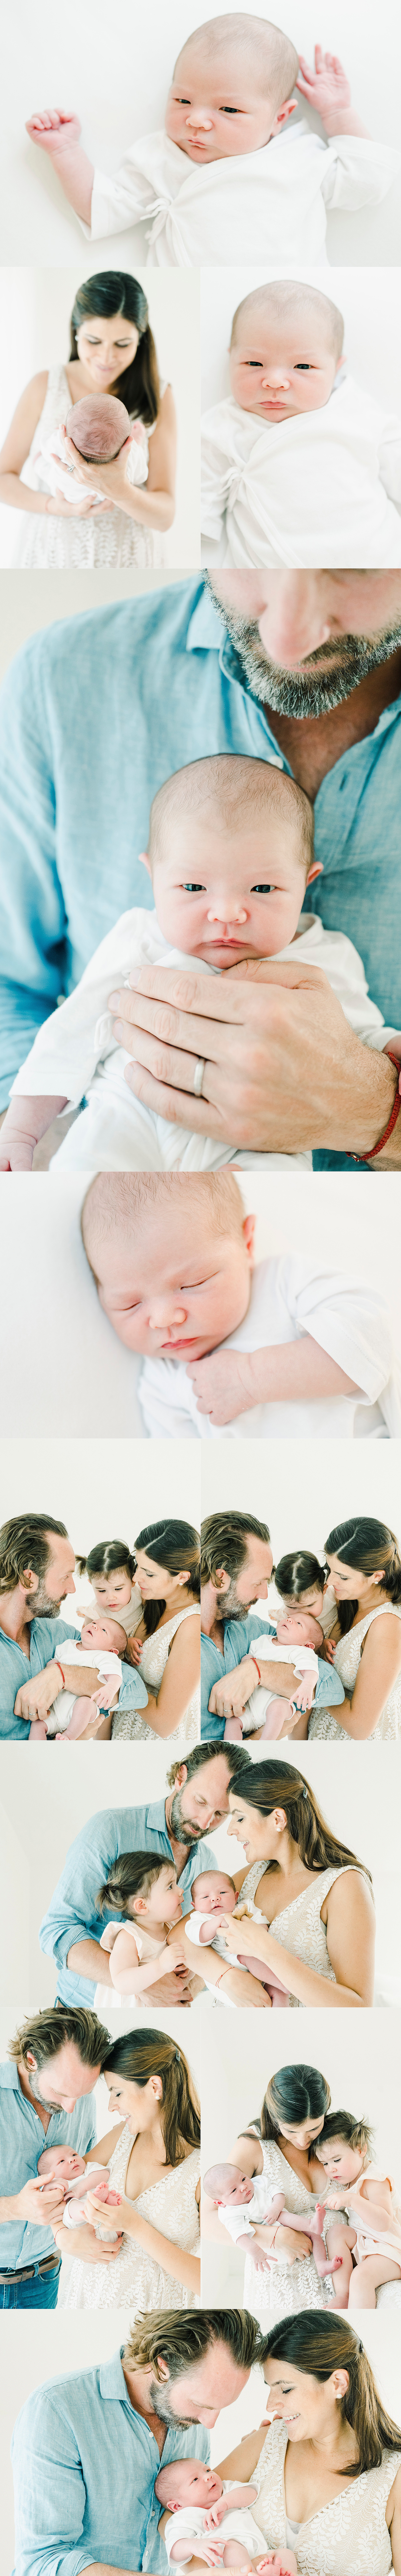 newborn baby brother in studio with big sister